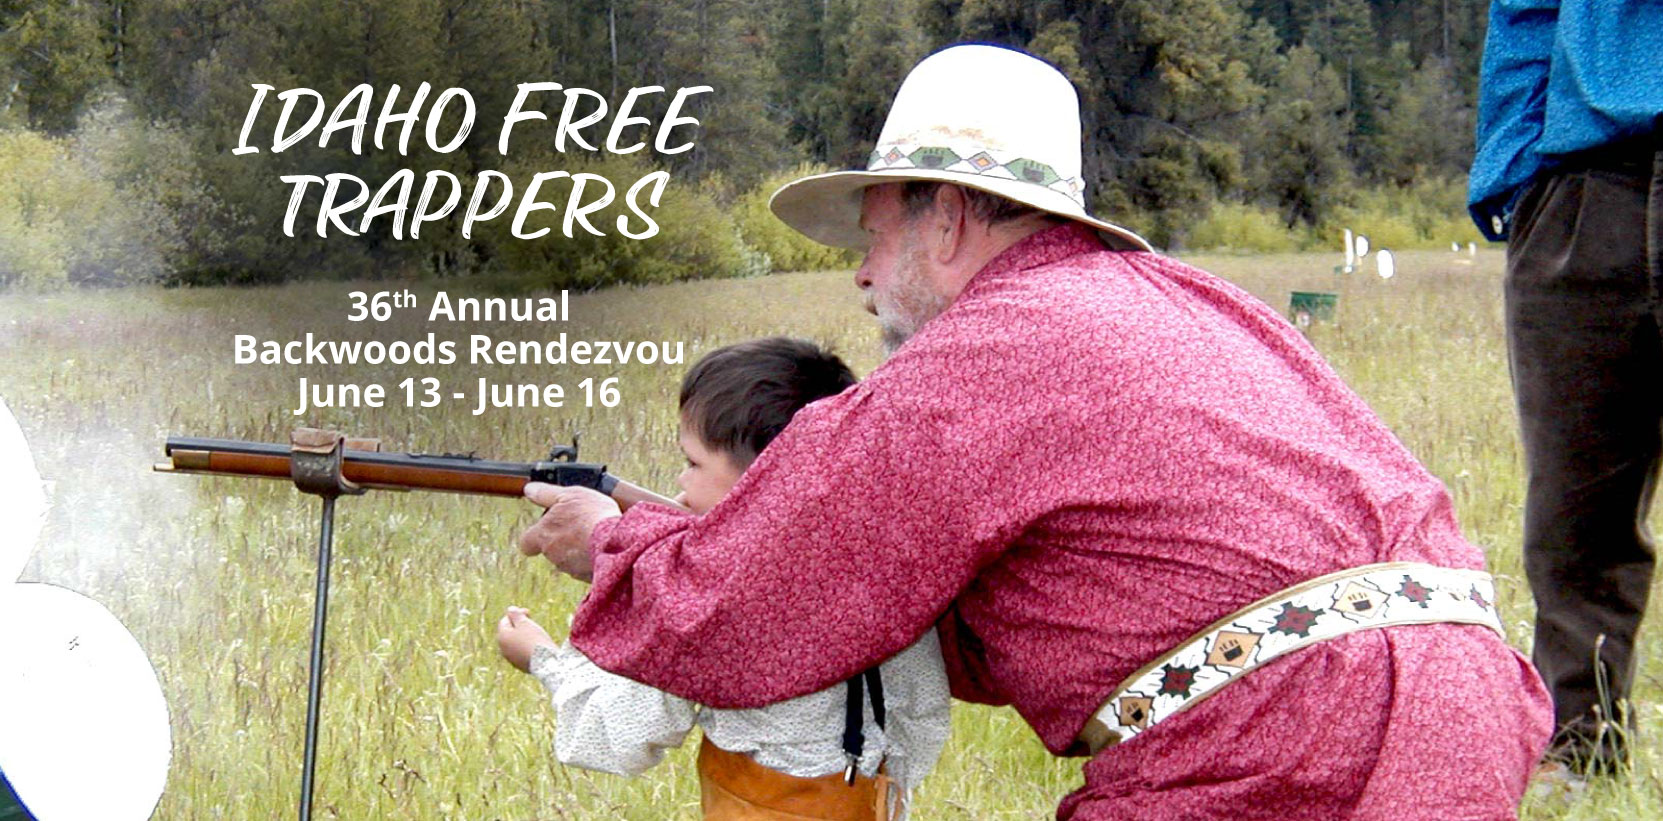 Idaho Free Trappers 36th Annual Backwoods Rendezvous